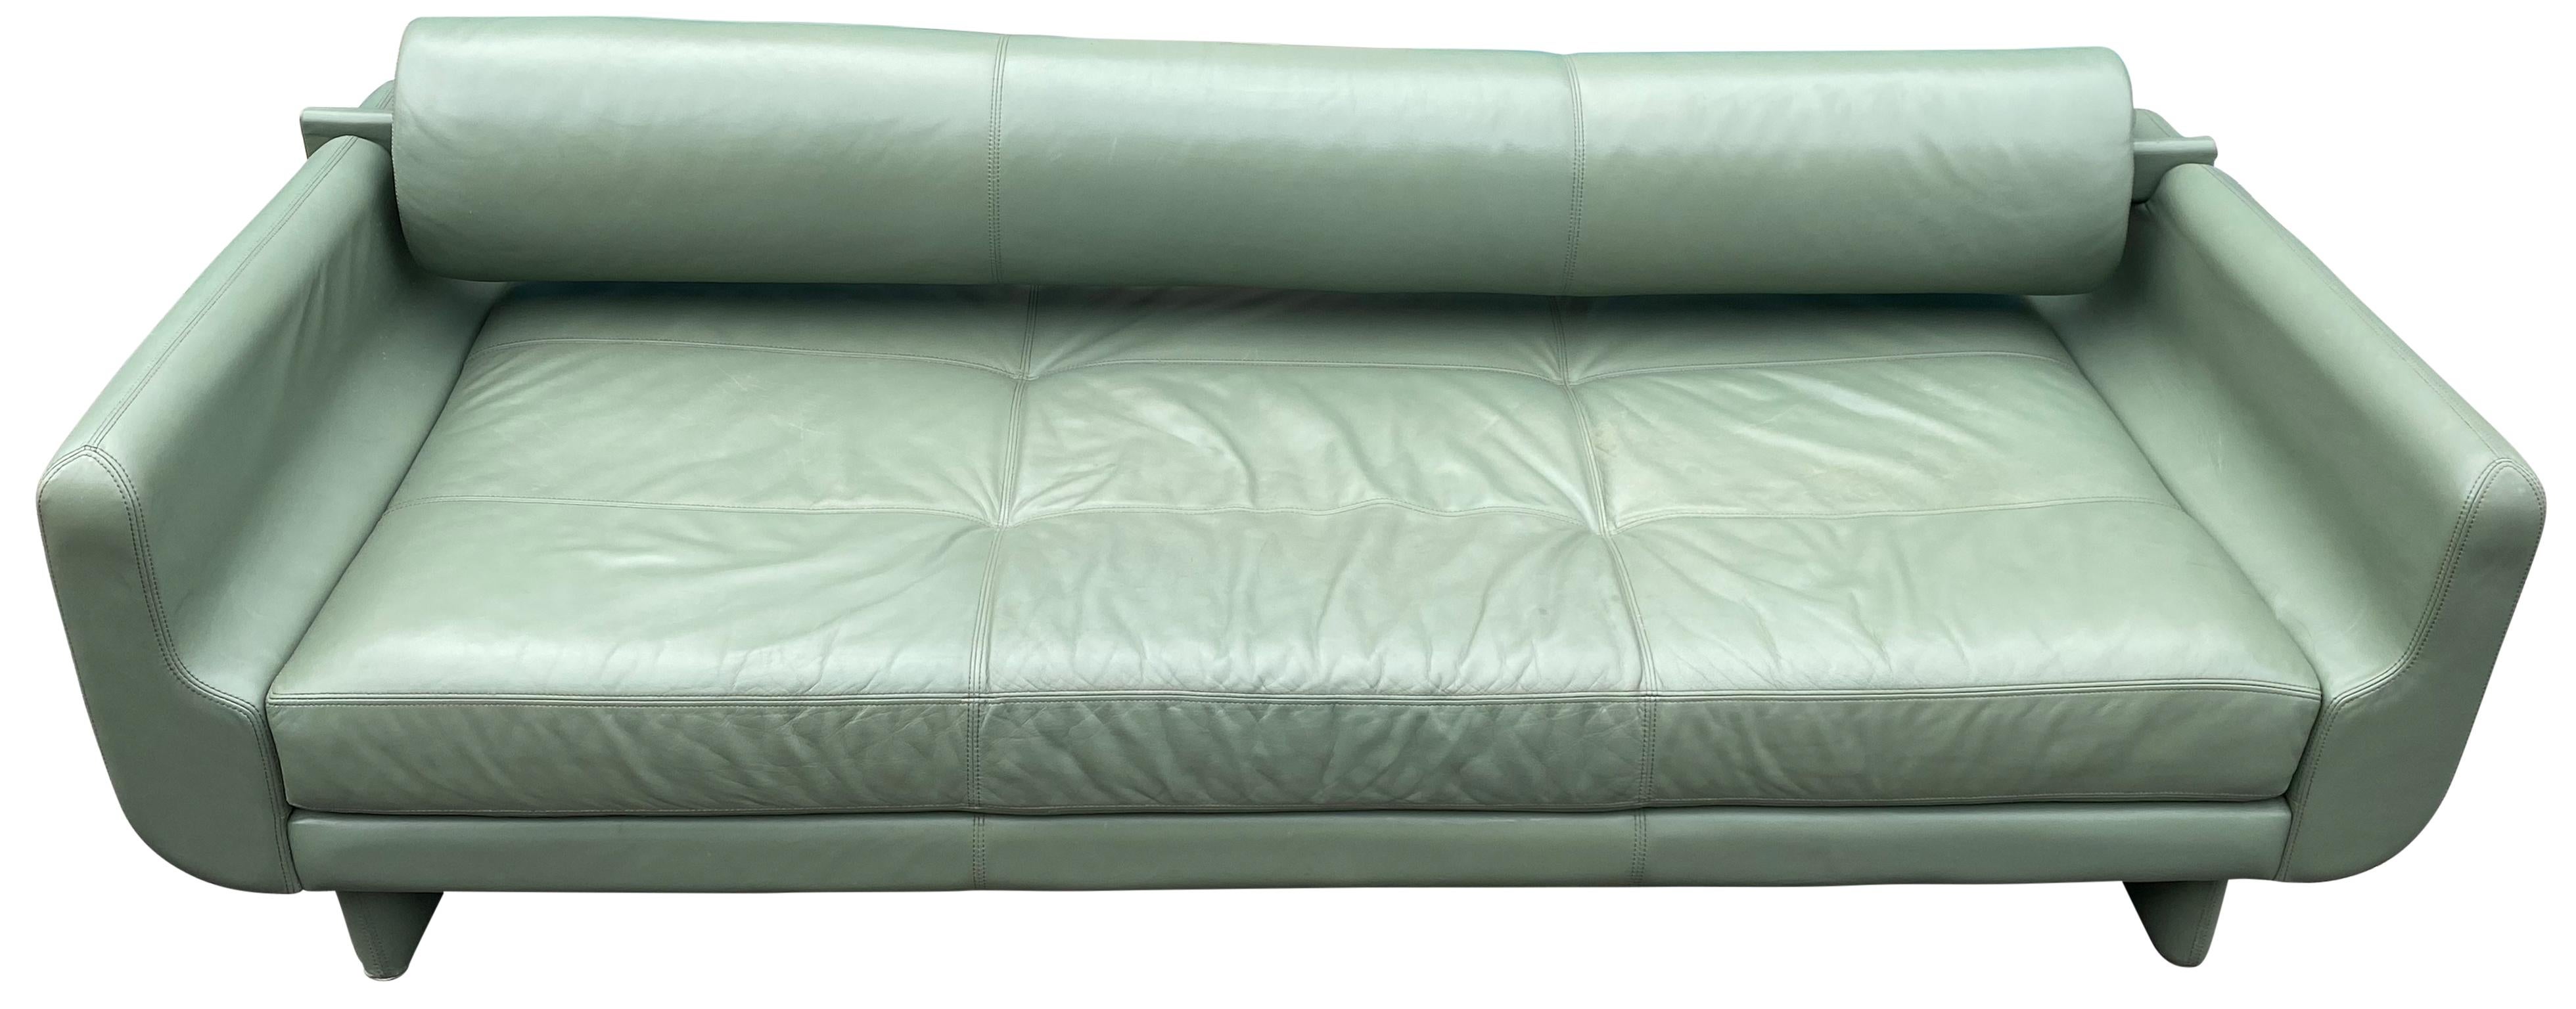 Beautiful designer leather matinee daybed sofa designed by Vladimir Kagan for American Leather Studios. Amazing light green sage soft leather. Has a (1) removable back bolster in sage green leather. When the back bolster is removed the sofa converts